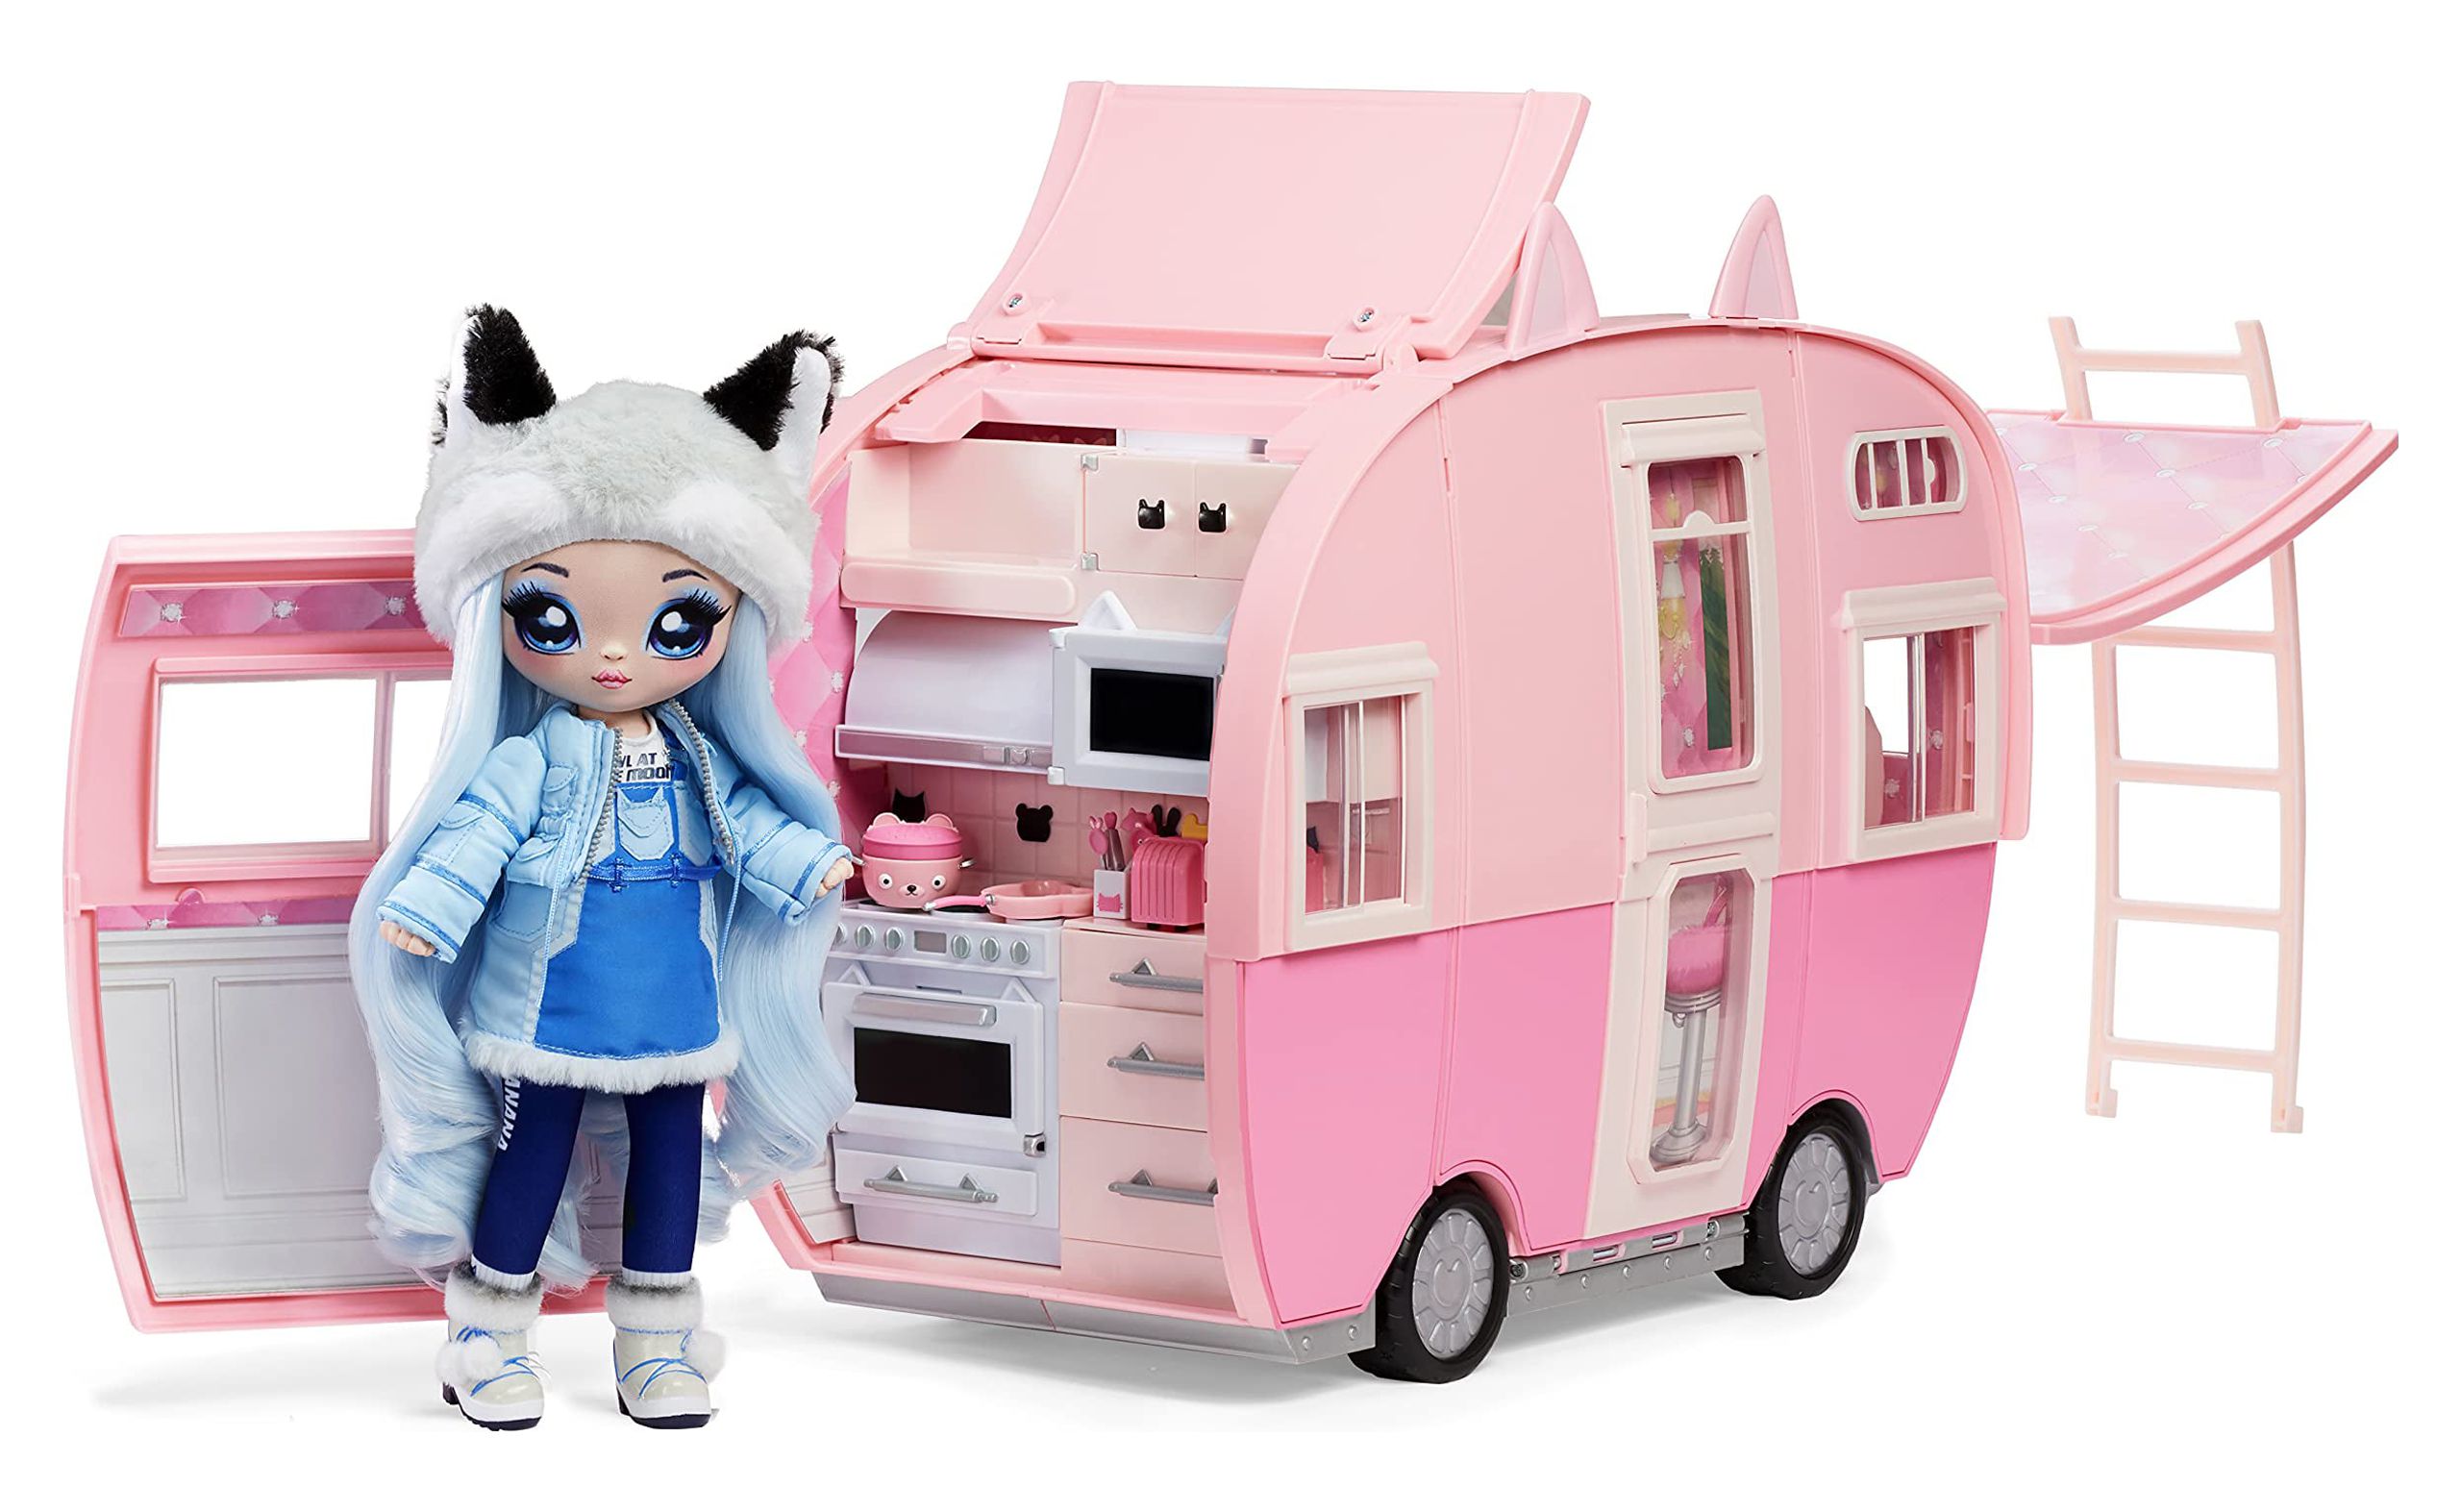 Na Na Na Surprise Kitty-Cat Camper Playset, Pink Toy Car Vehicle for Fashion Dolls with Cat Ears & Tail, Opens to 3 Feet Wide for 360 Play, 7 Play Areas, Accessories, Gift for Kids Ages 5 6 7 8+ Years - image 5 of 11